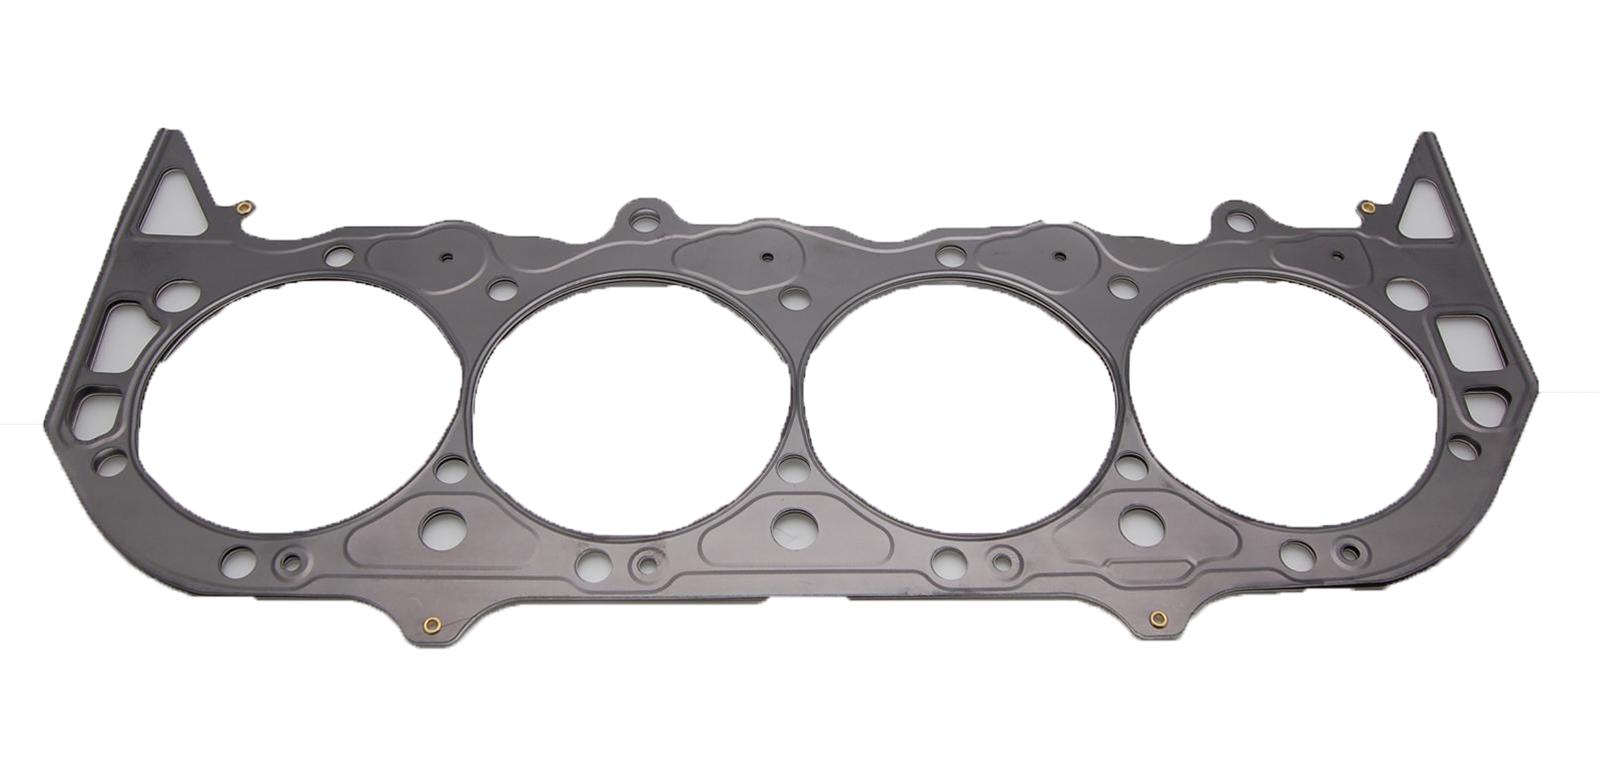 Cometic Gasket C5331-060 MLS .060 Thickness 4.630 Head Gasket for Big Block Chevy